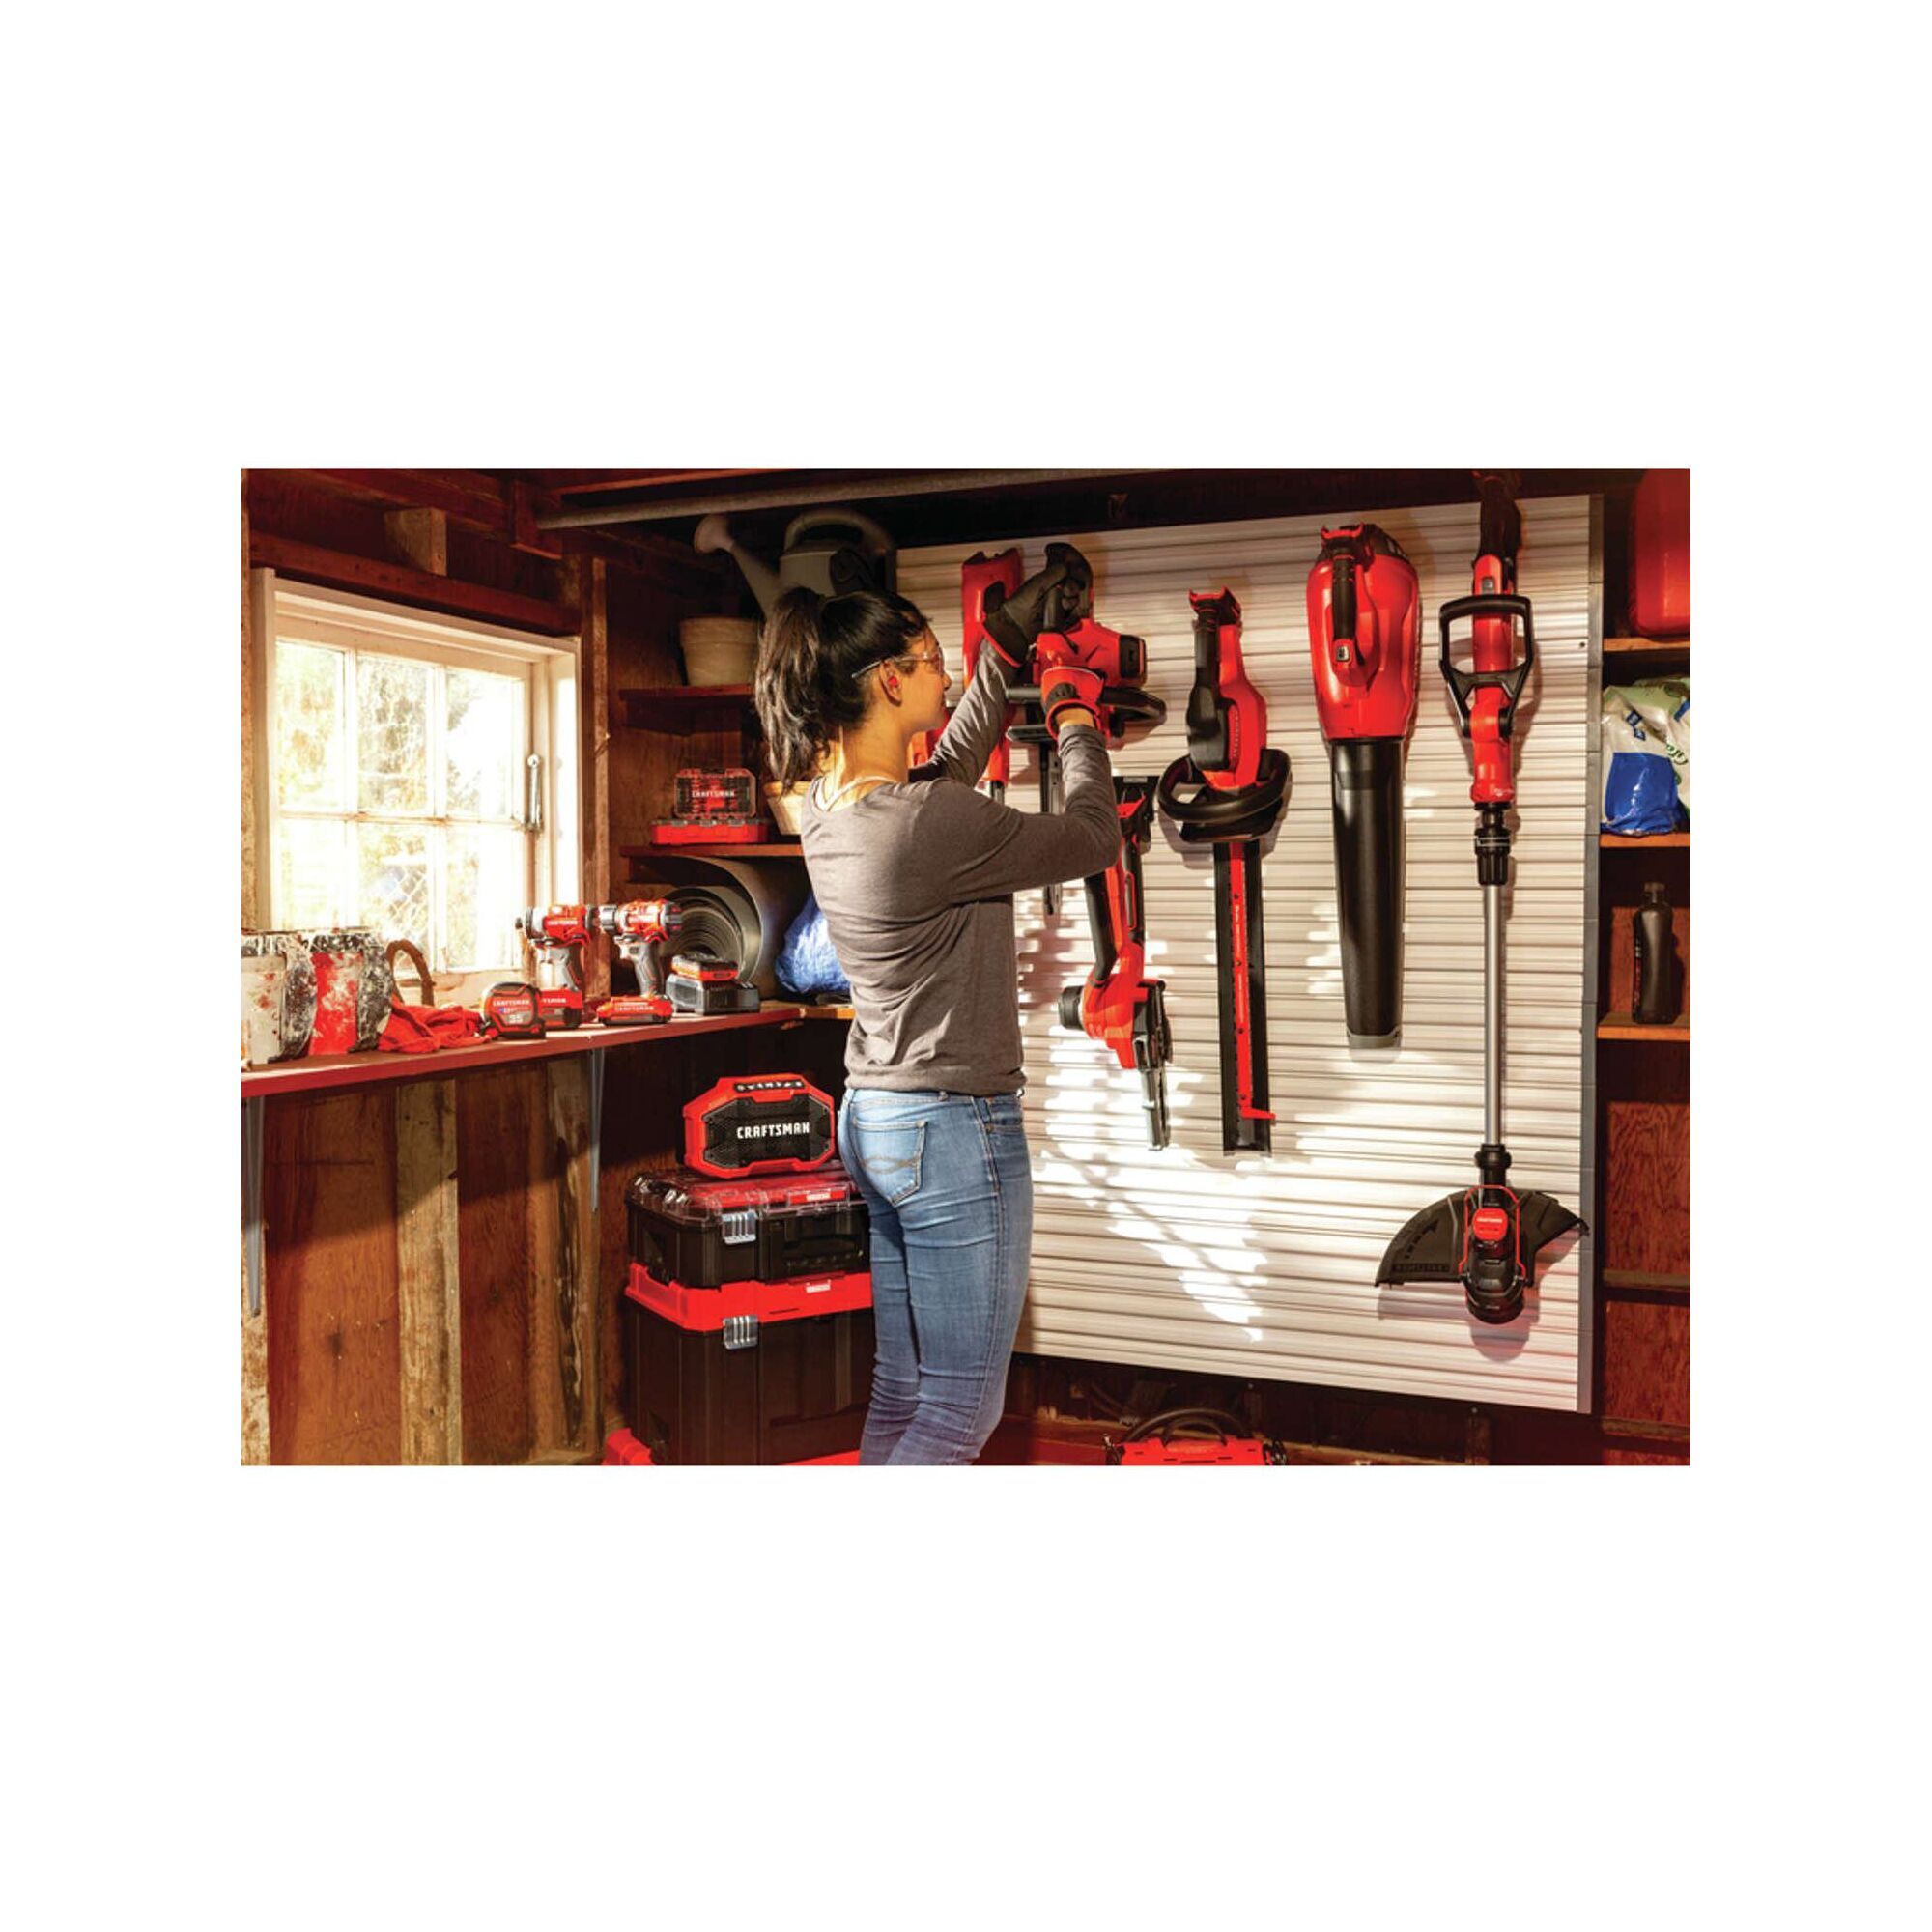 View of CRAFTSMAN Hedge Trimmers family of products